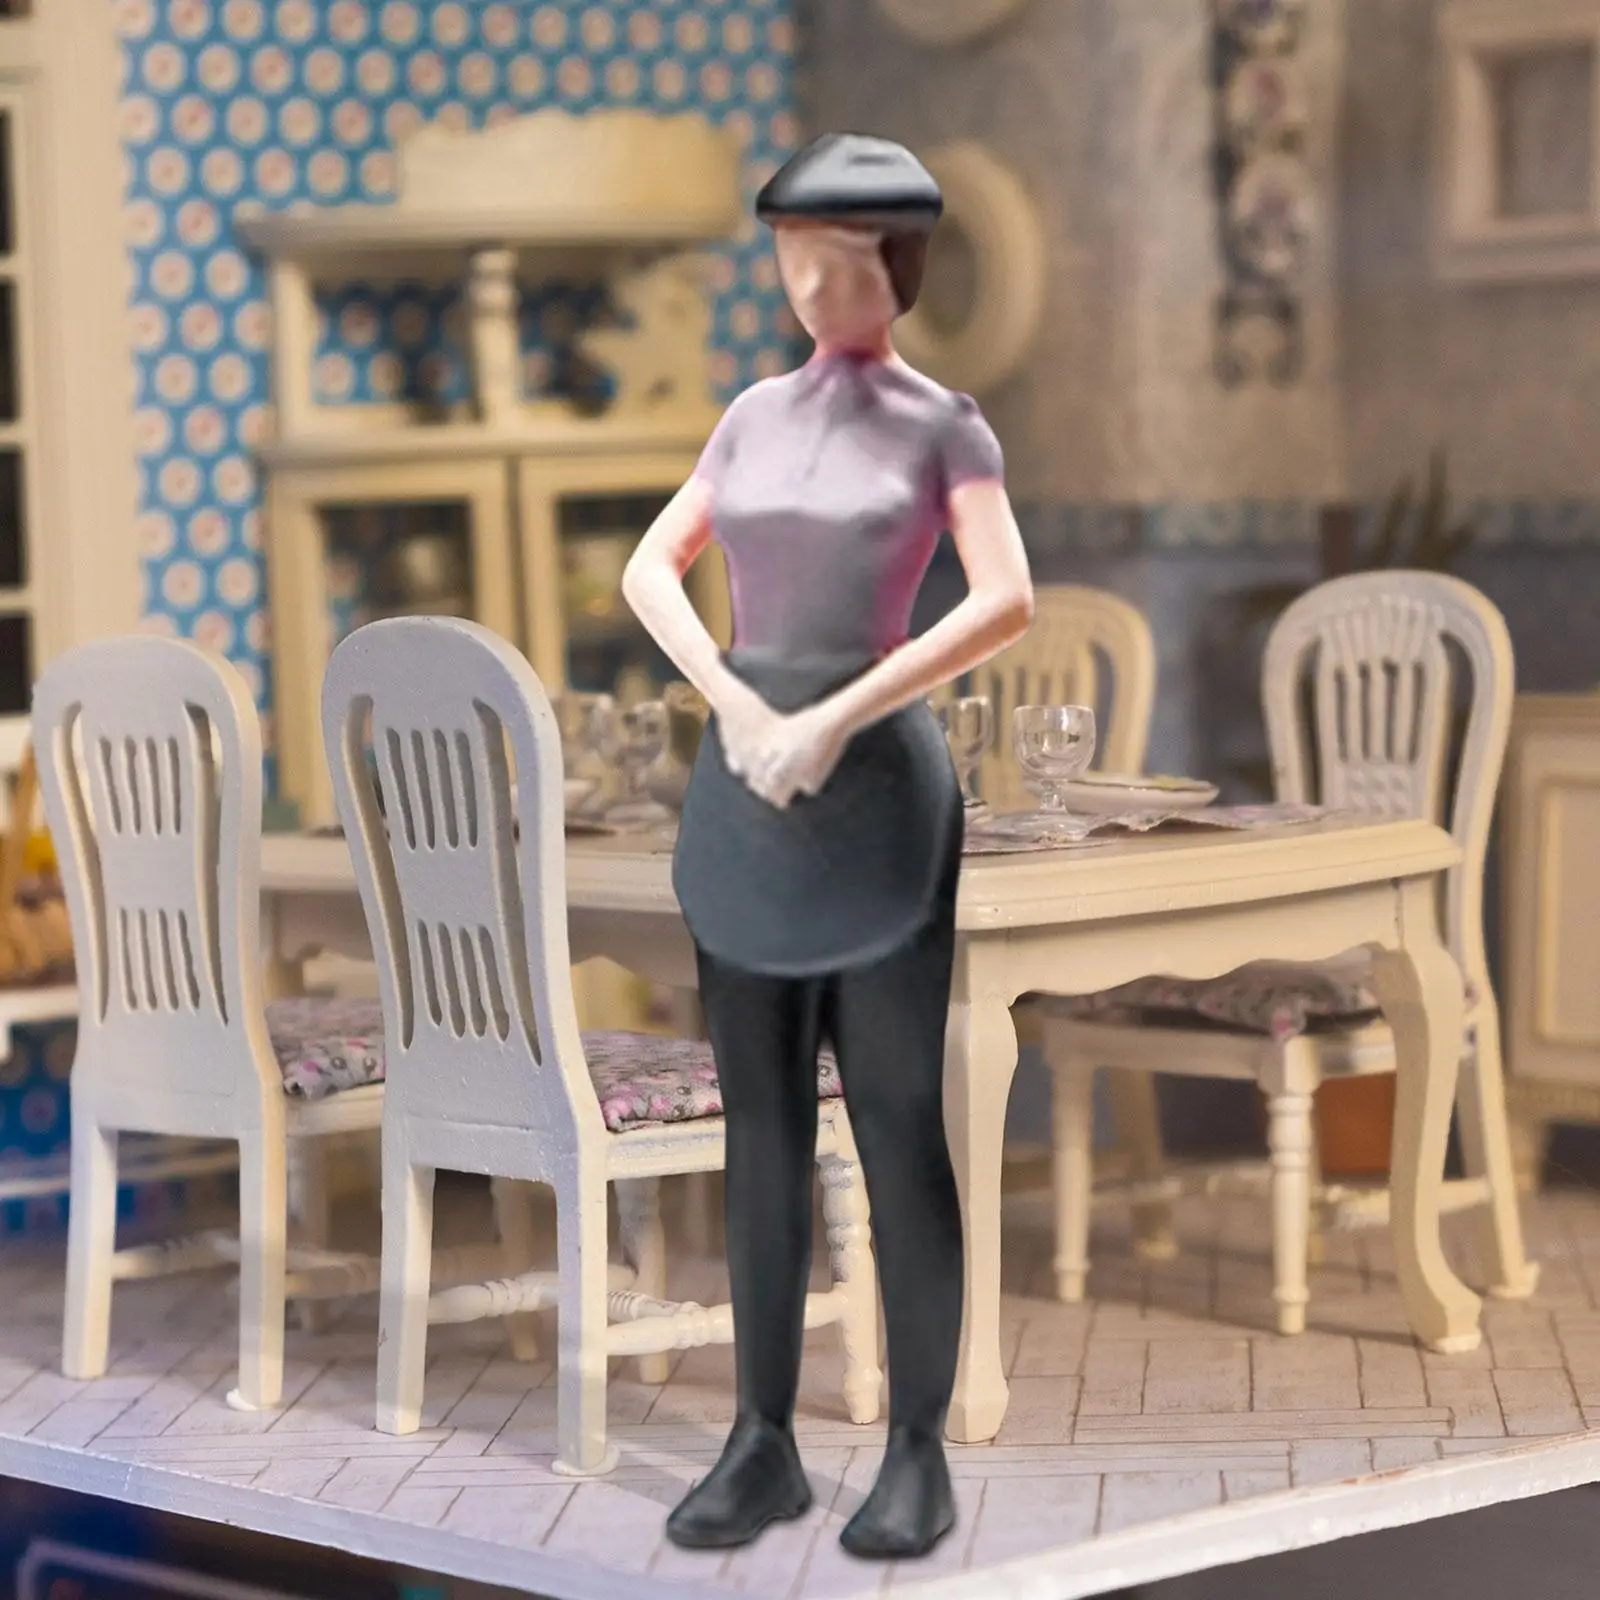 1/64 Model Waitress Figures Characters Figures Model Trains People Figures for Dollhouse